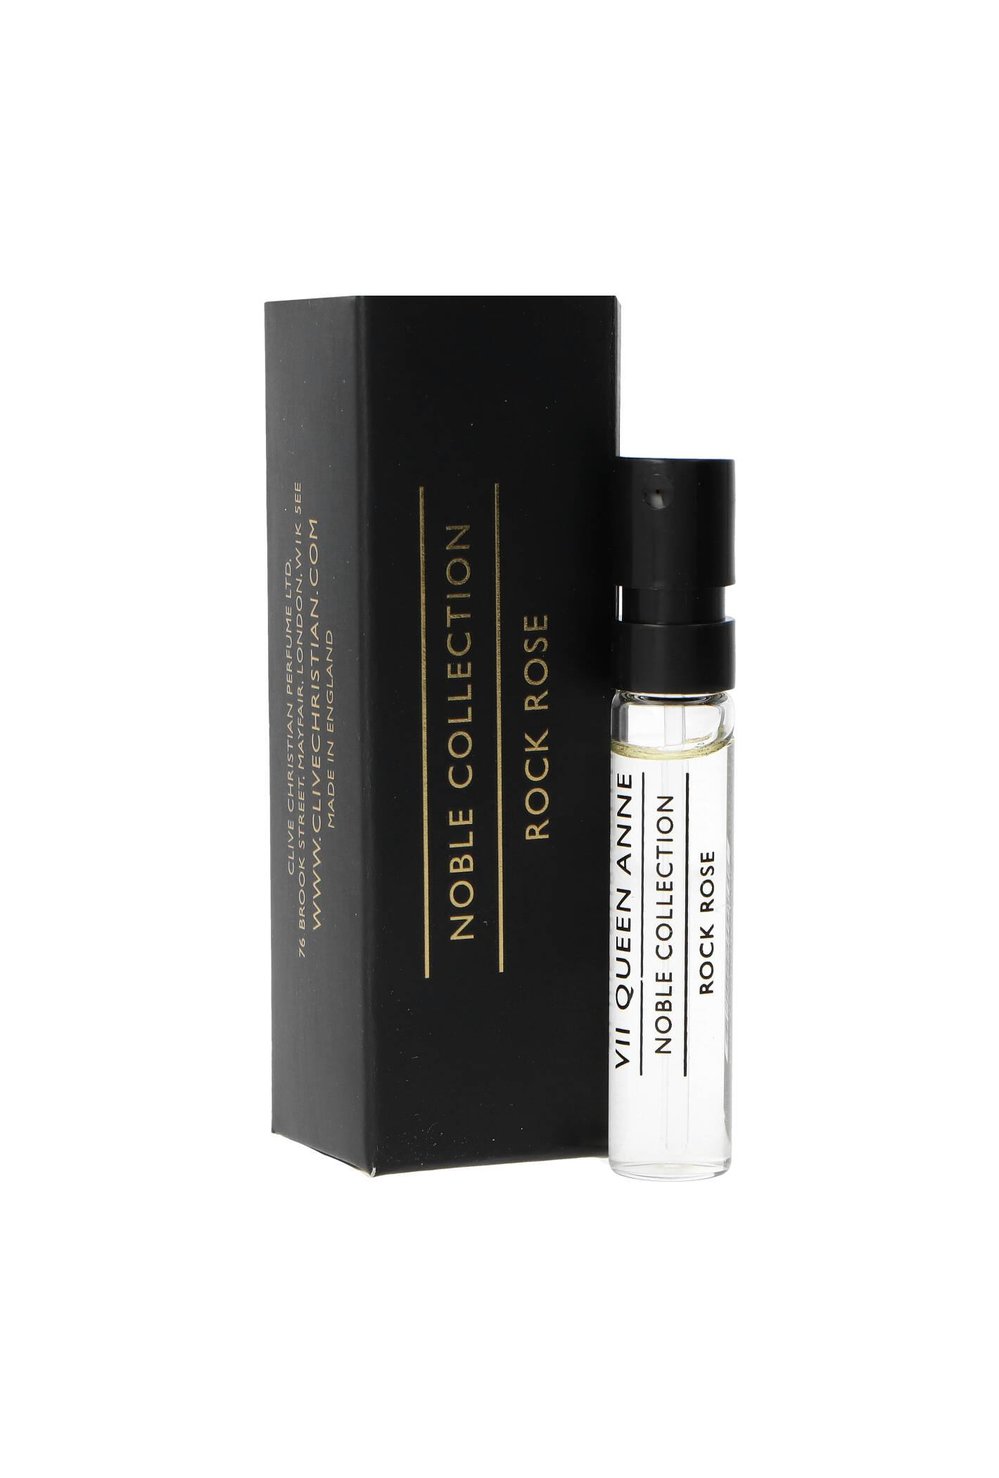 Clive Christian Noble COLLECTION ROCK ROSE 2ml official perfume sample